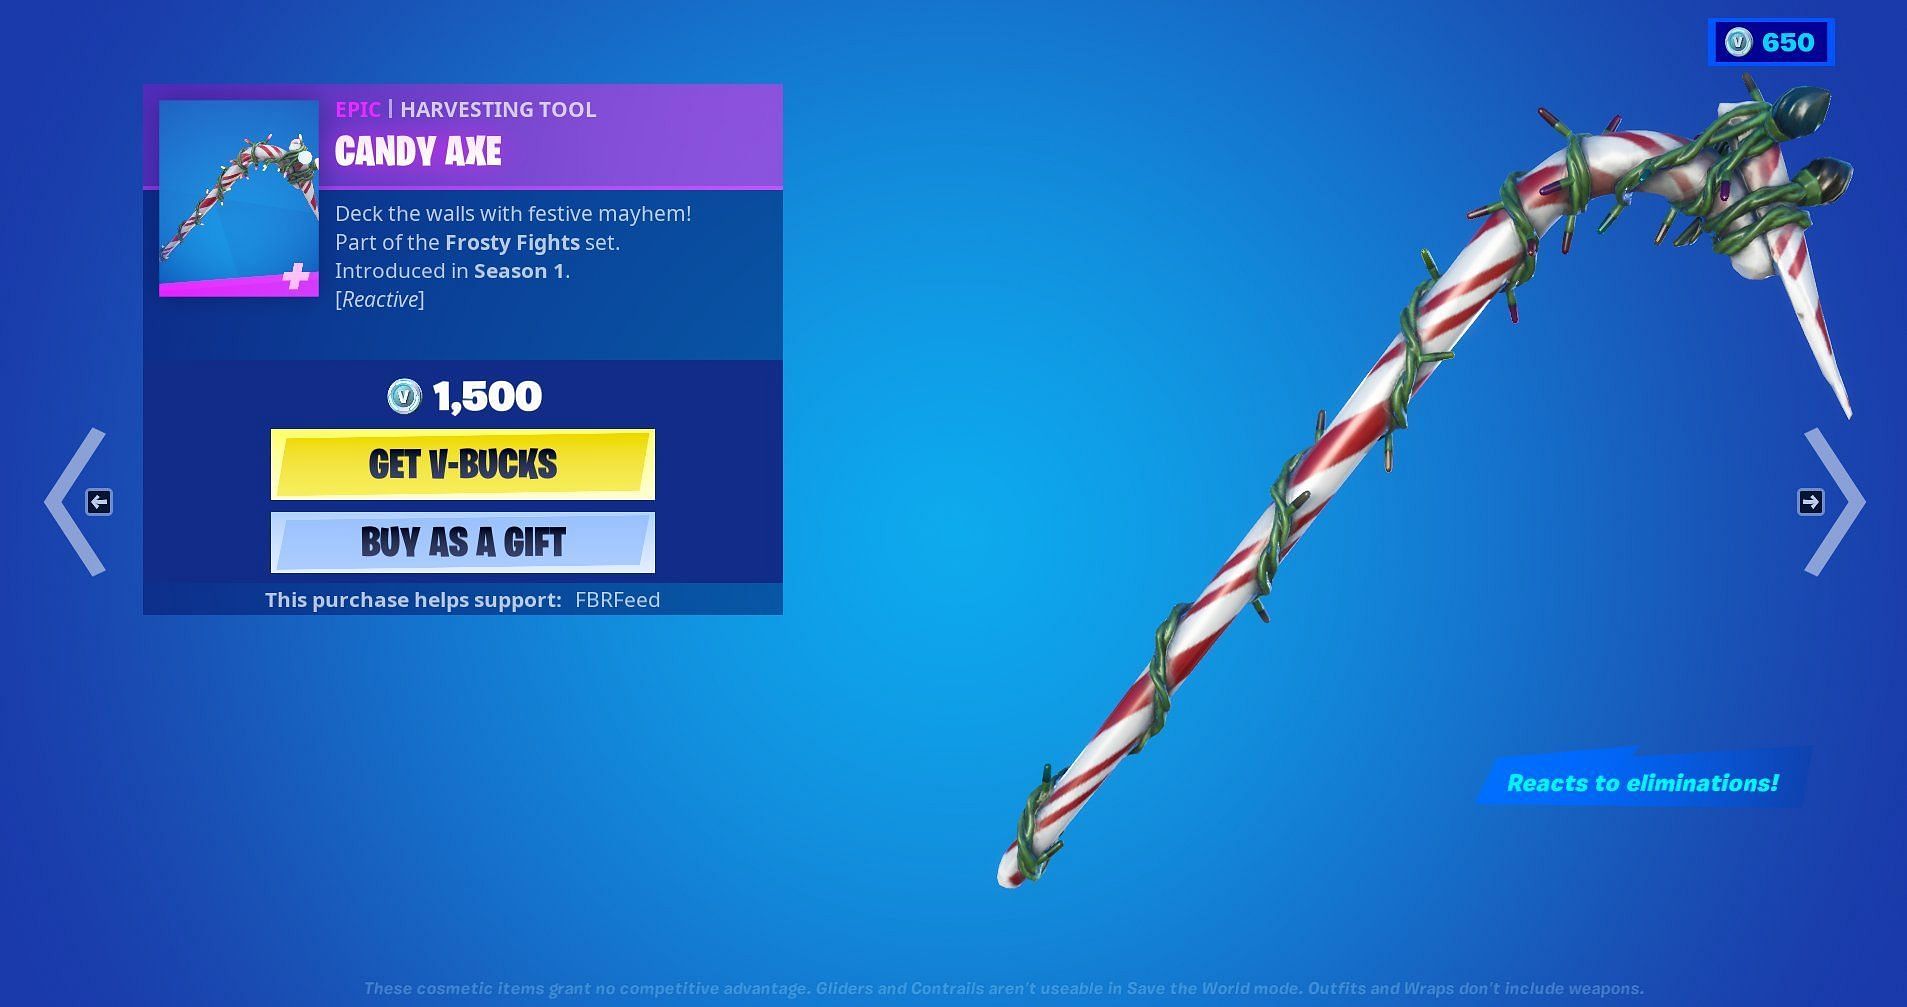 Candy Axe is an expensive Fortnite cosmetic that is not worth the money (Image via FBRFeed/Twitter)